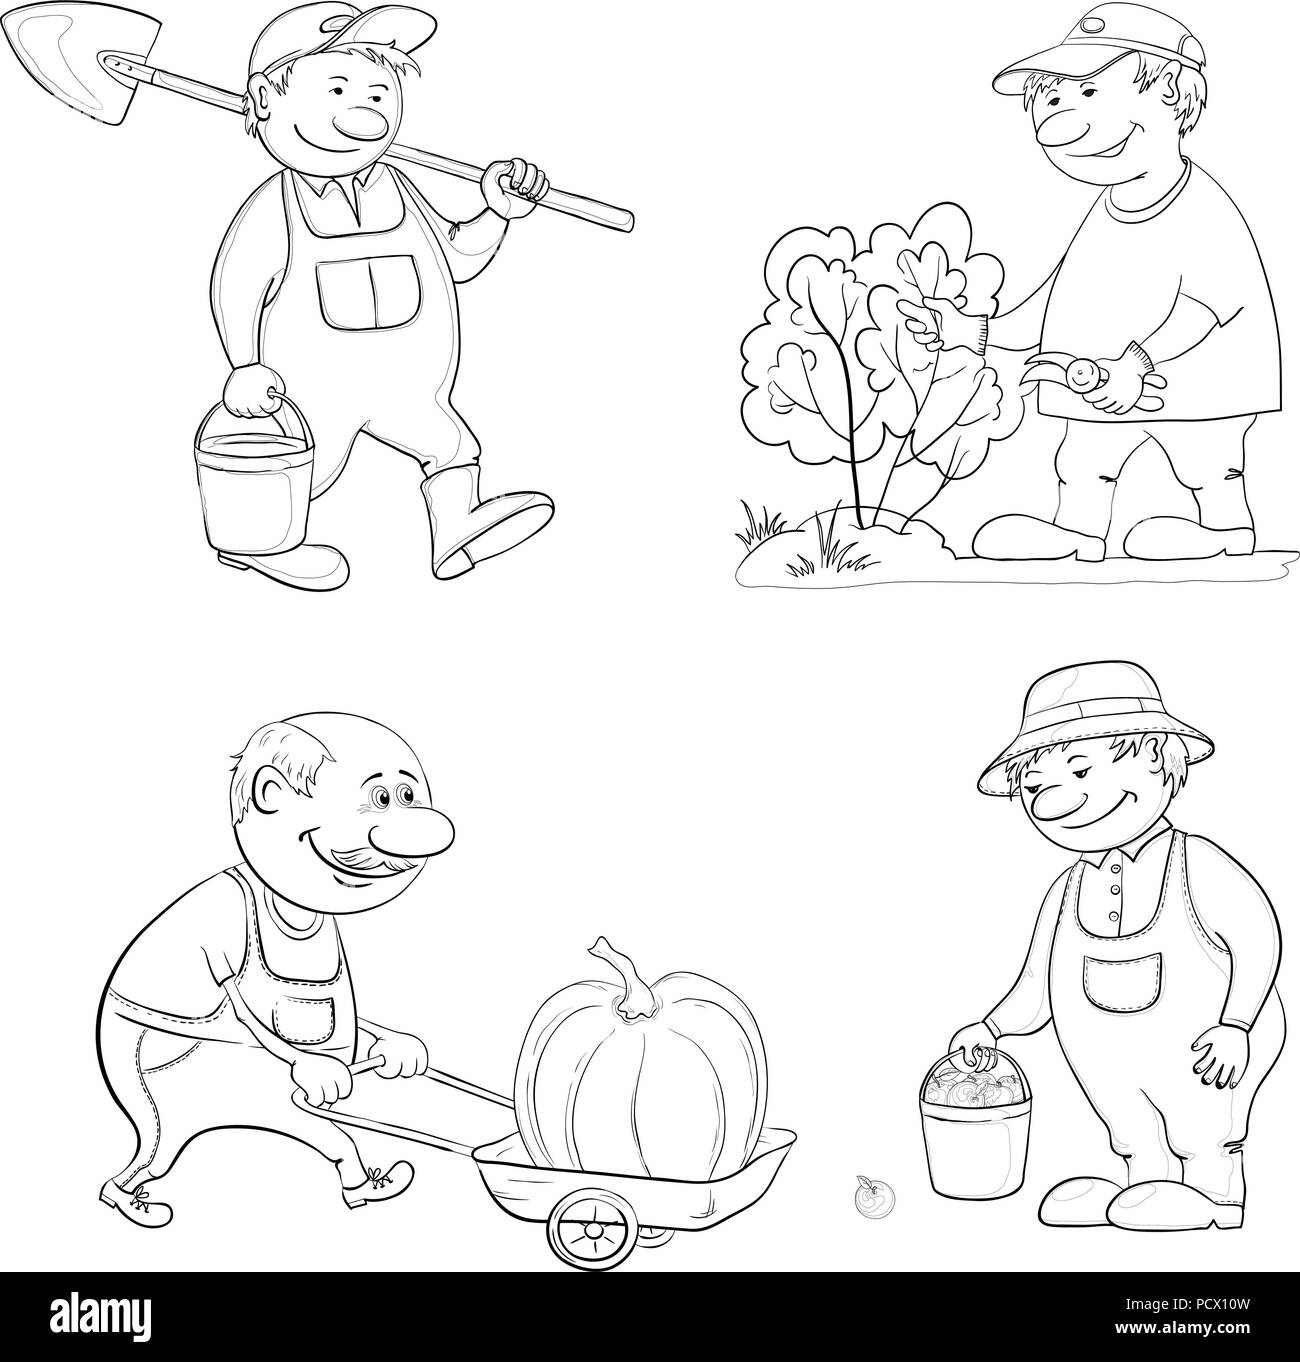 Cartoon Gardeners Work with a Bucket and Spade, Cuts a Bush with Secateurs, Carries Trolley with Pumpkin, with Harvest of Apples. Black Contour on Whi Stock Vector